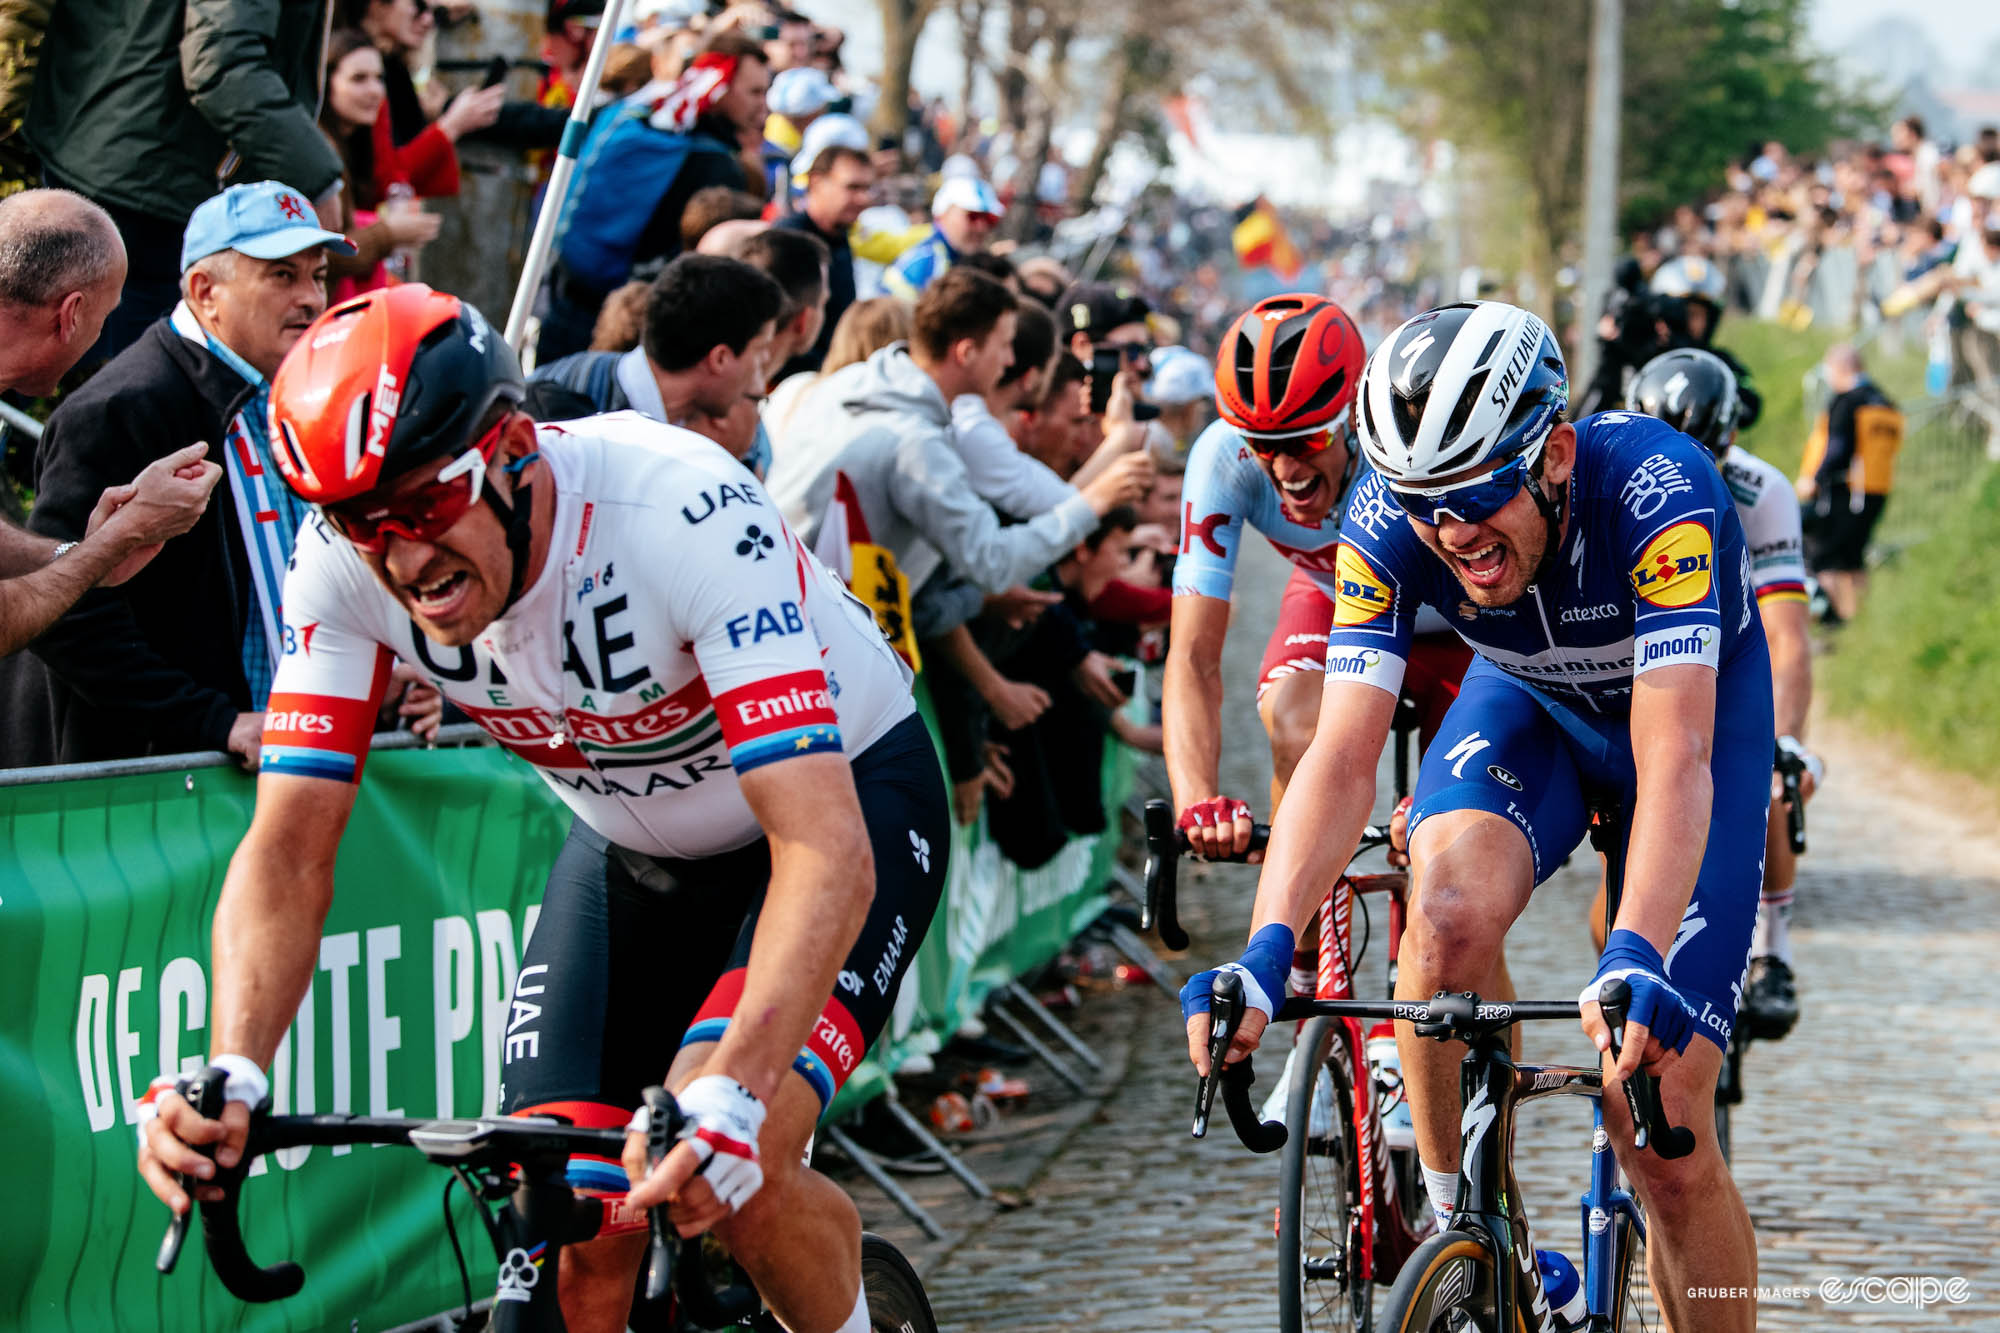 Alexander Kristoff and Kasper Asgreen fight to climb the Oude Kwaremont, mouths open from the effort and clearly straining.